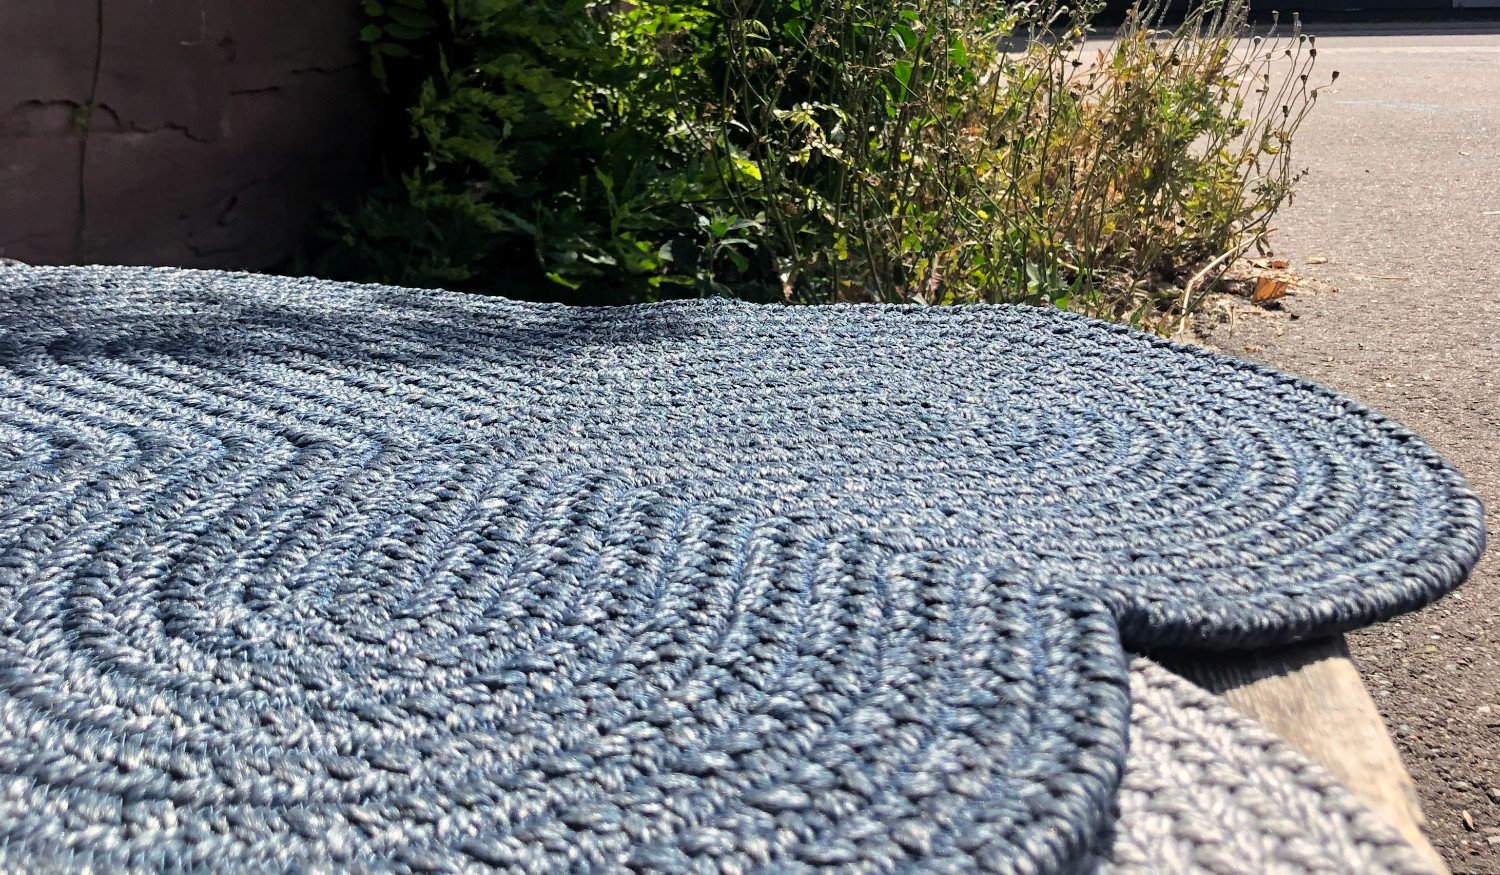 Braided wool rugs laying outside in the fresh air of a driveway to dry after a cleaning.